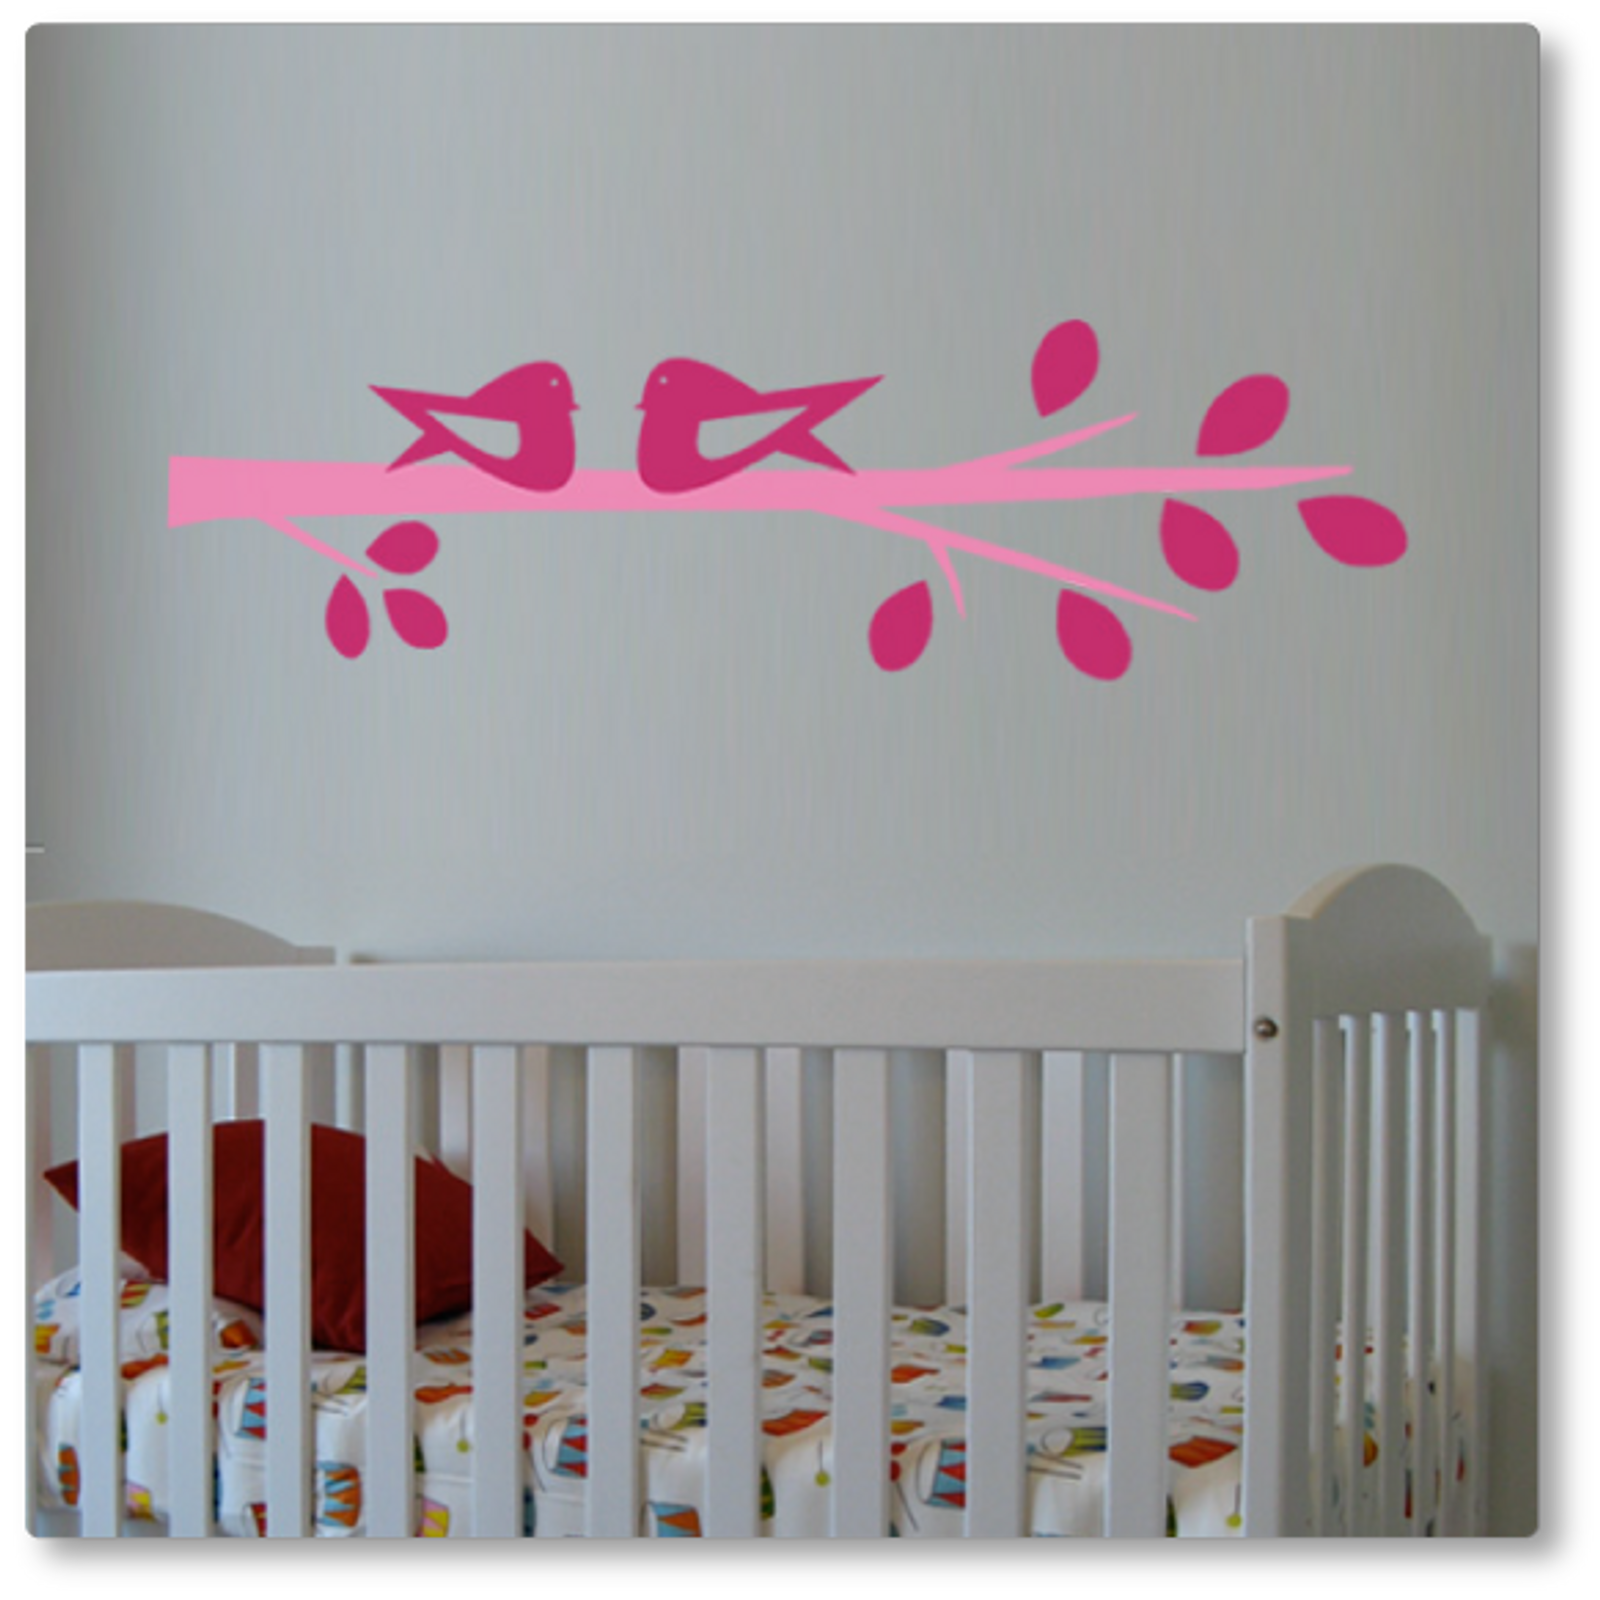 Our cute birds on a branch wall decal features two birds sitting on a branch with leaves. Shown here in pink and light pink on a beige wall.